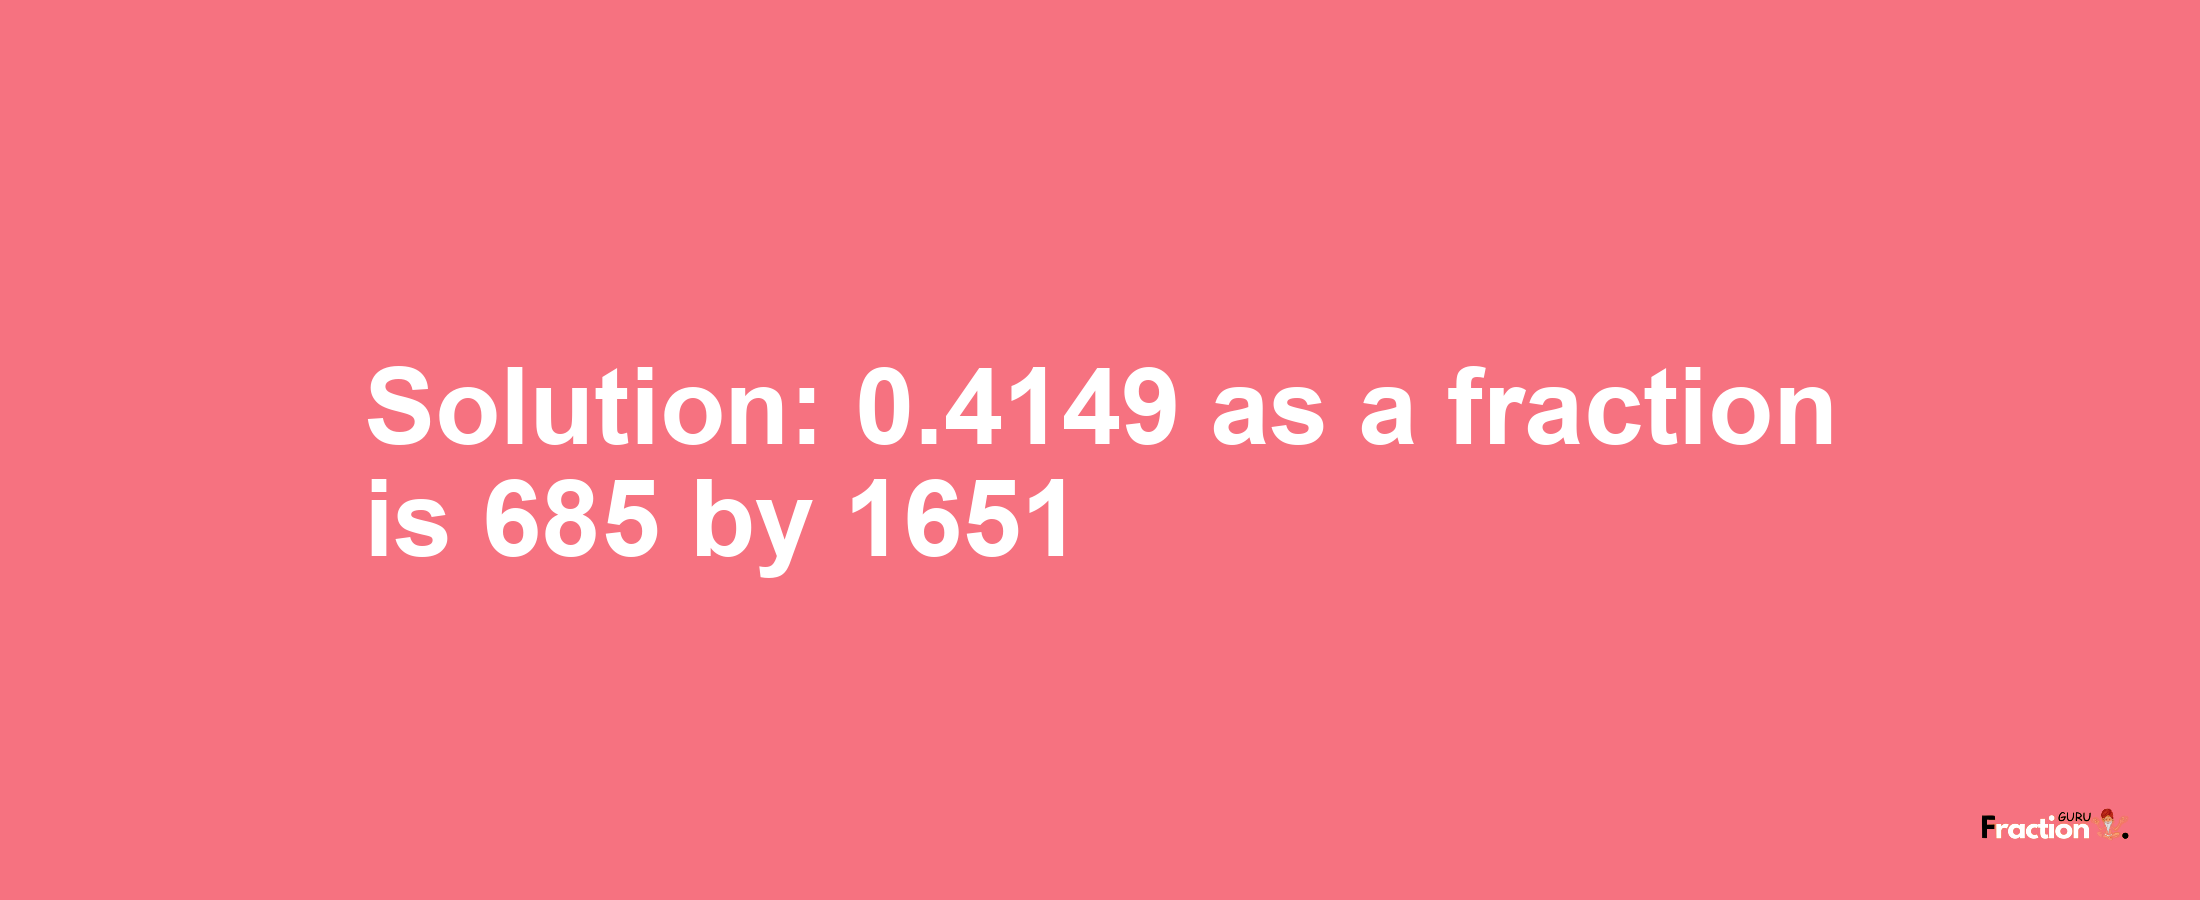 Solution:0.4149 as a fraction is 685/1651